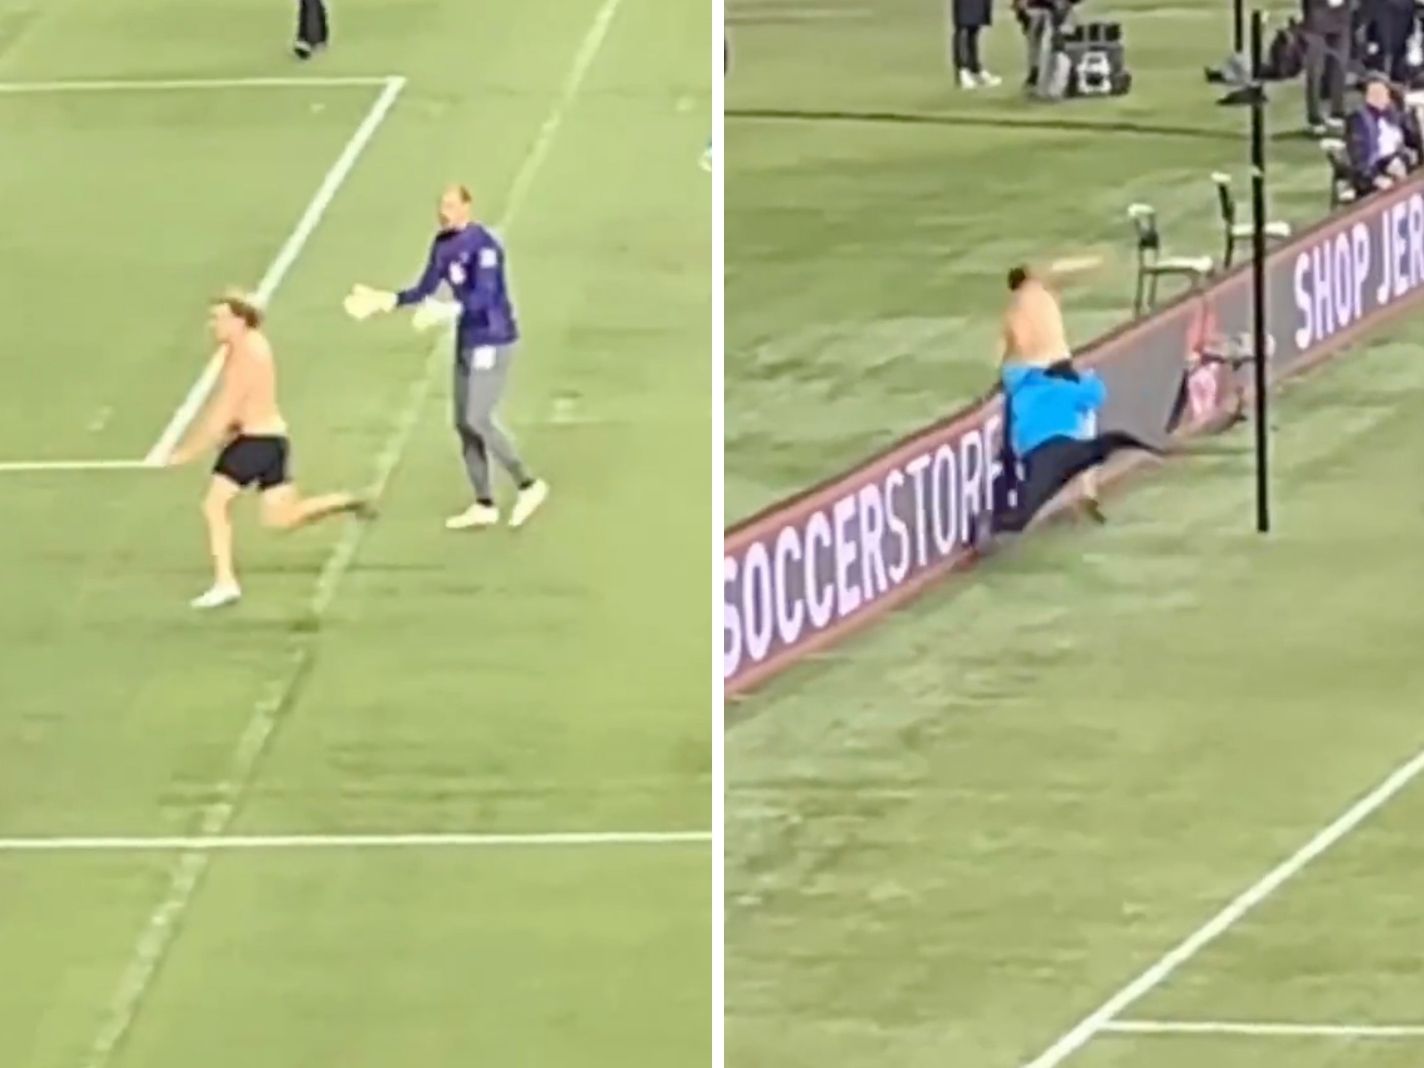 Canadian streaker suffers most brutal end to his pitch-invading journey